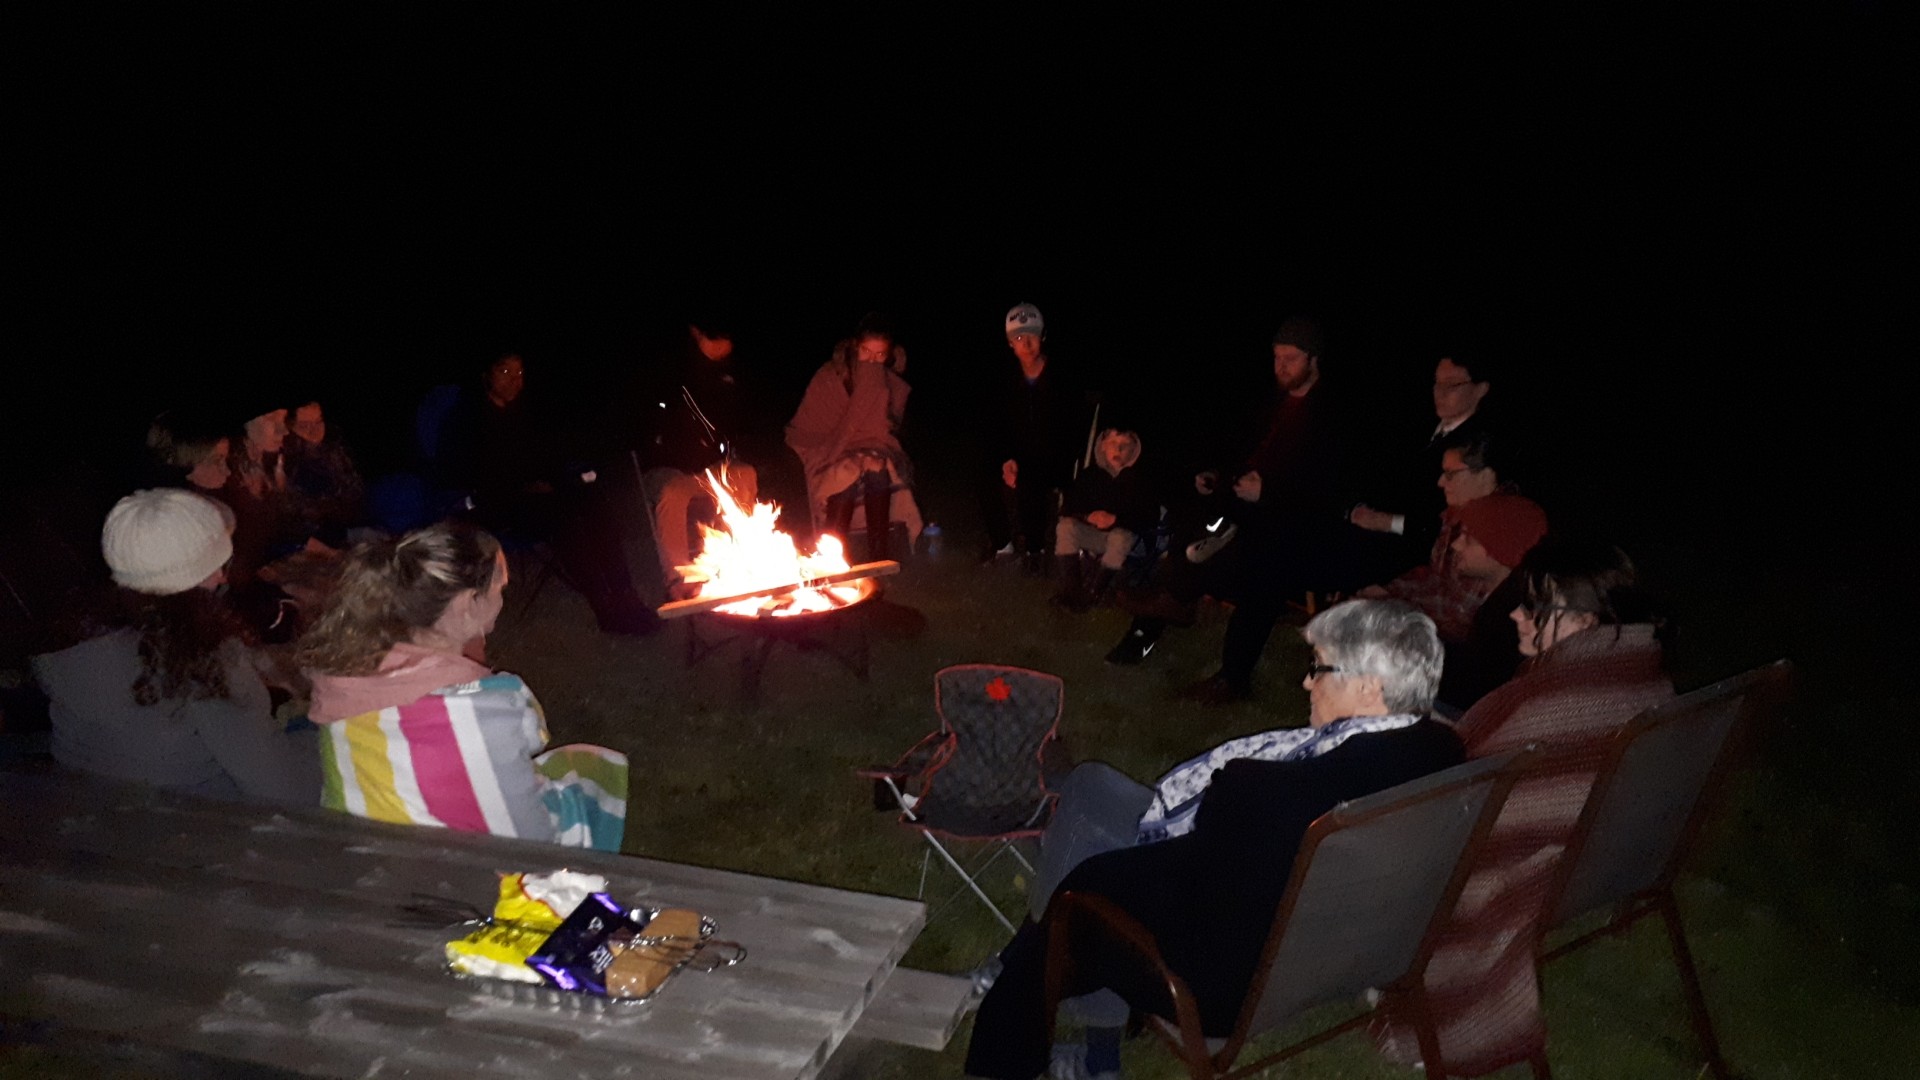 A group of people sitting around a bonfire